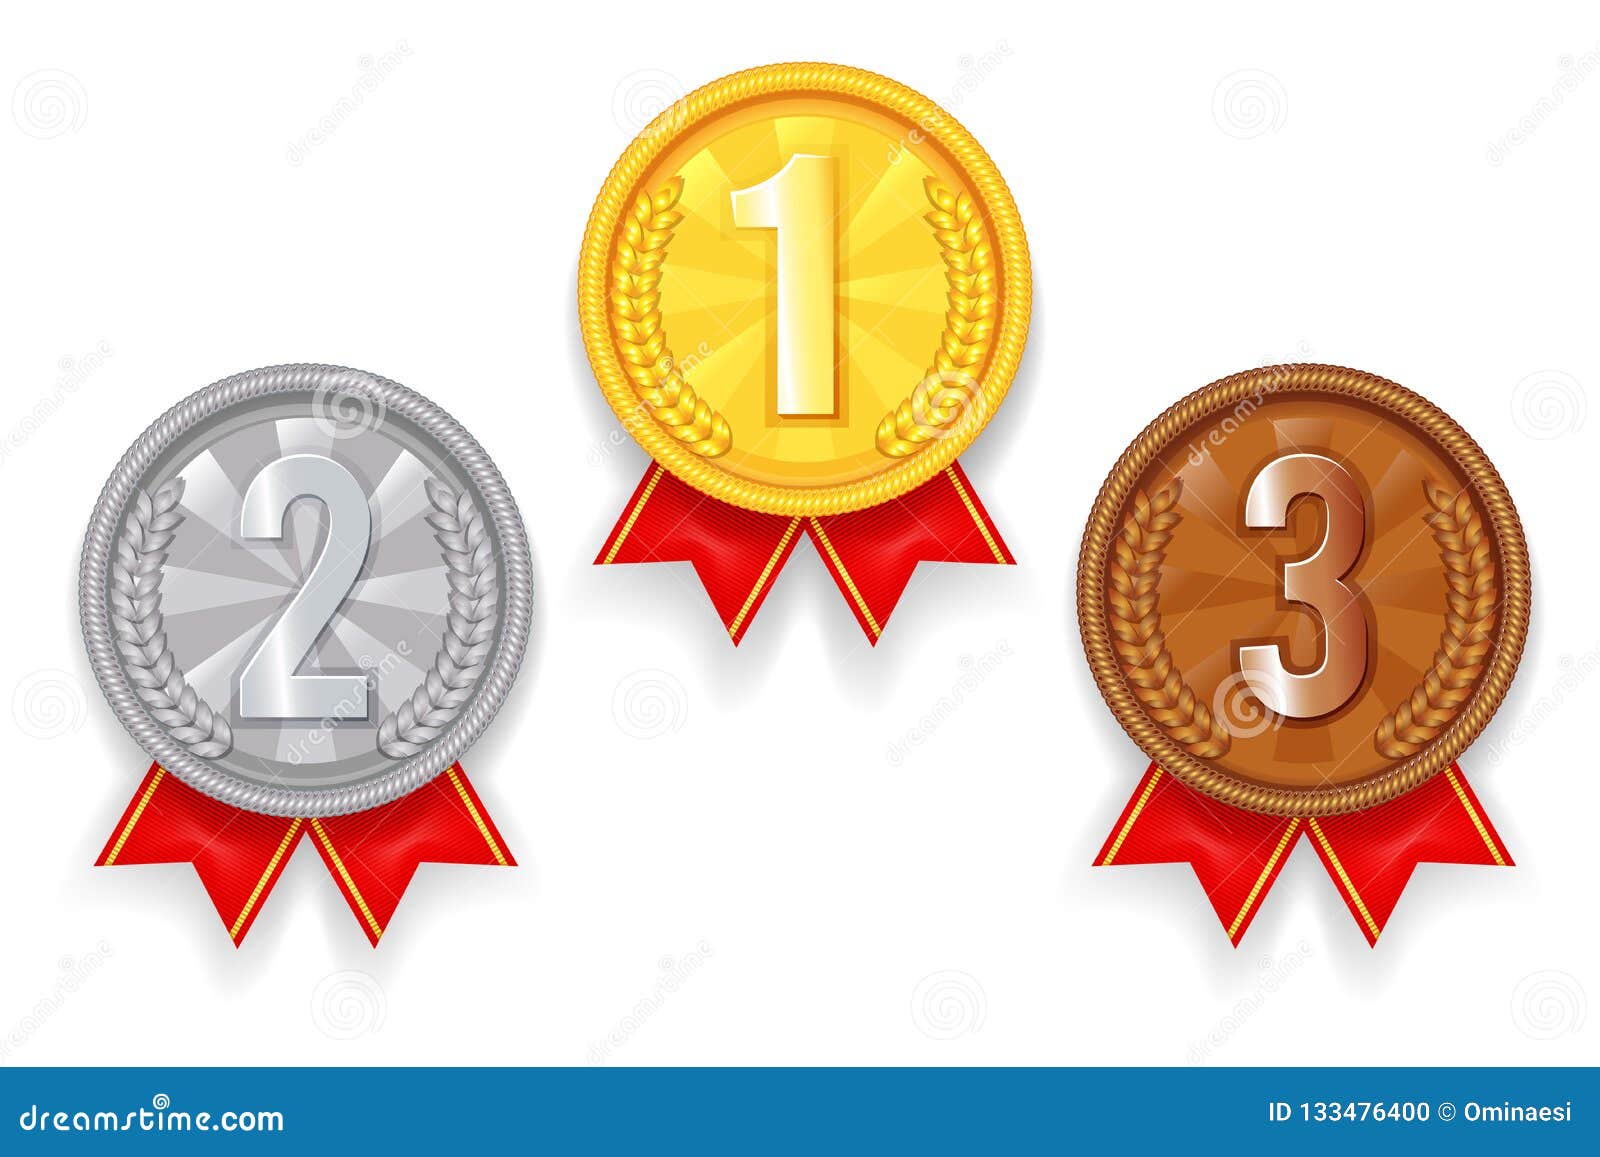 gold-silver-bronze-award-sport-1st-2nd-3rd-place-medal-red-ribbon-icons